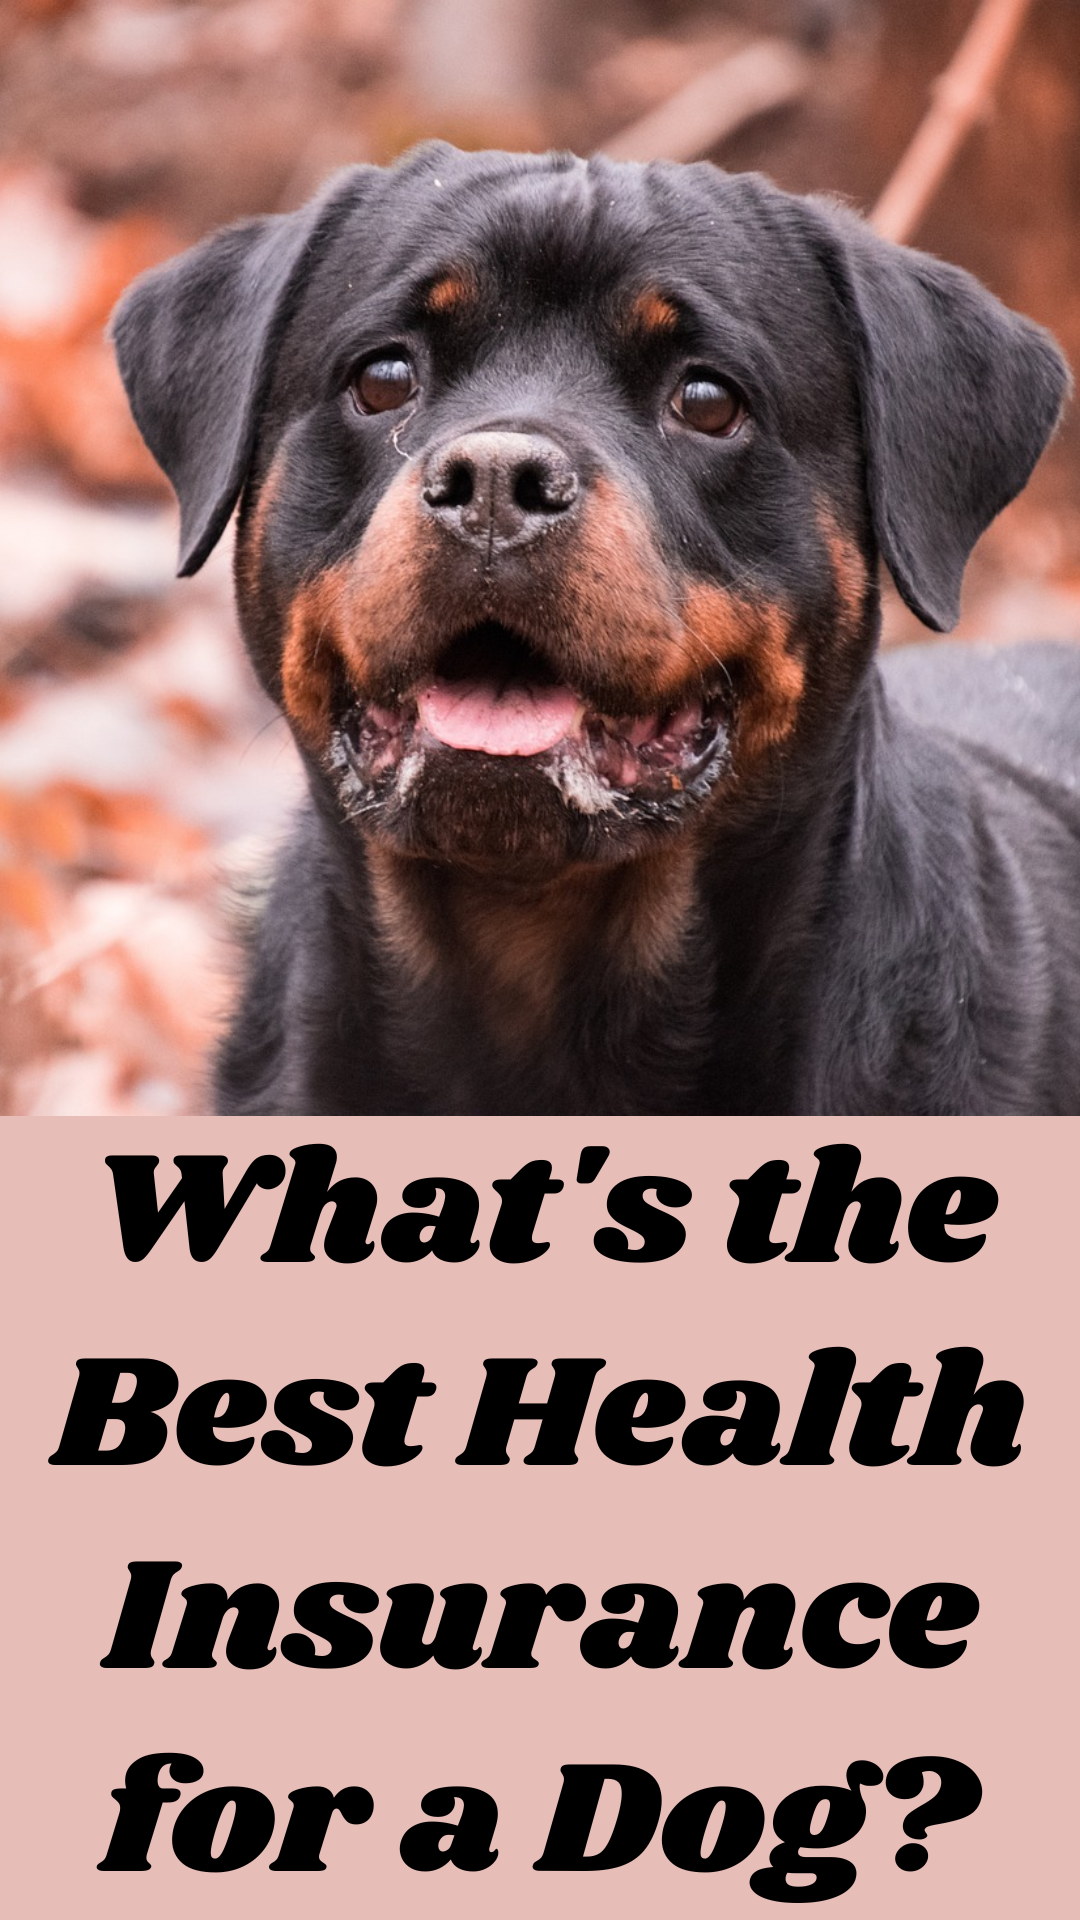 Is Dog Health Insurance Worth the Cost?